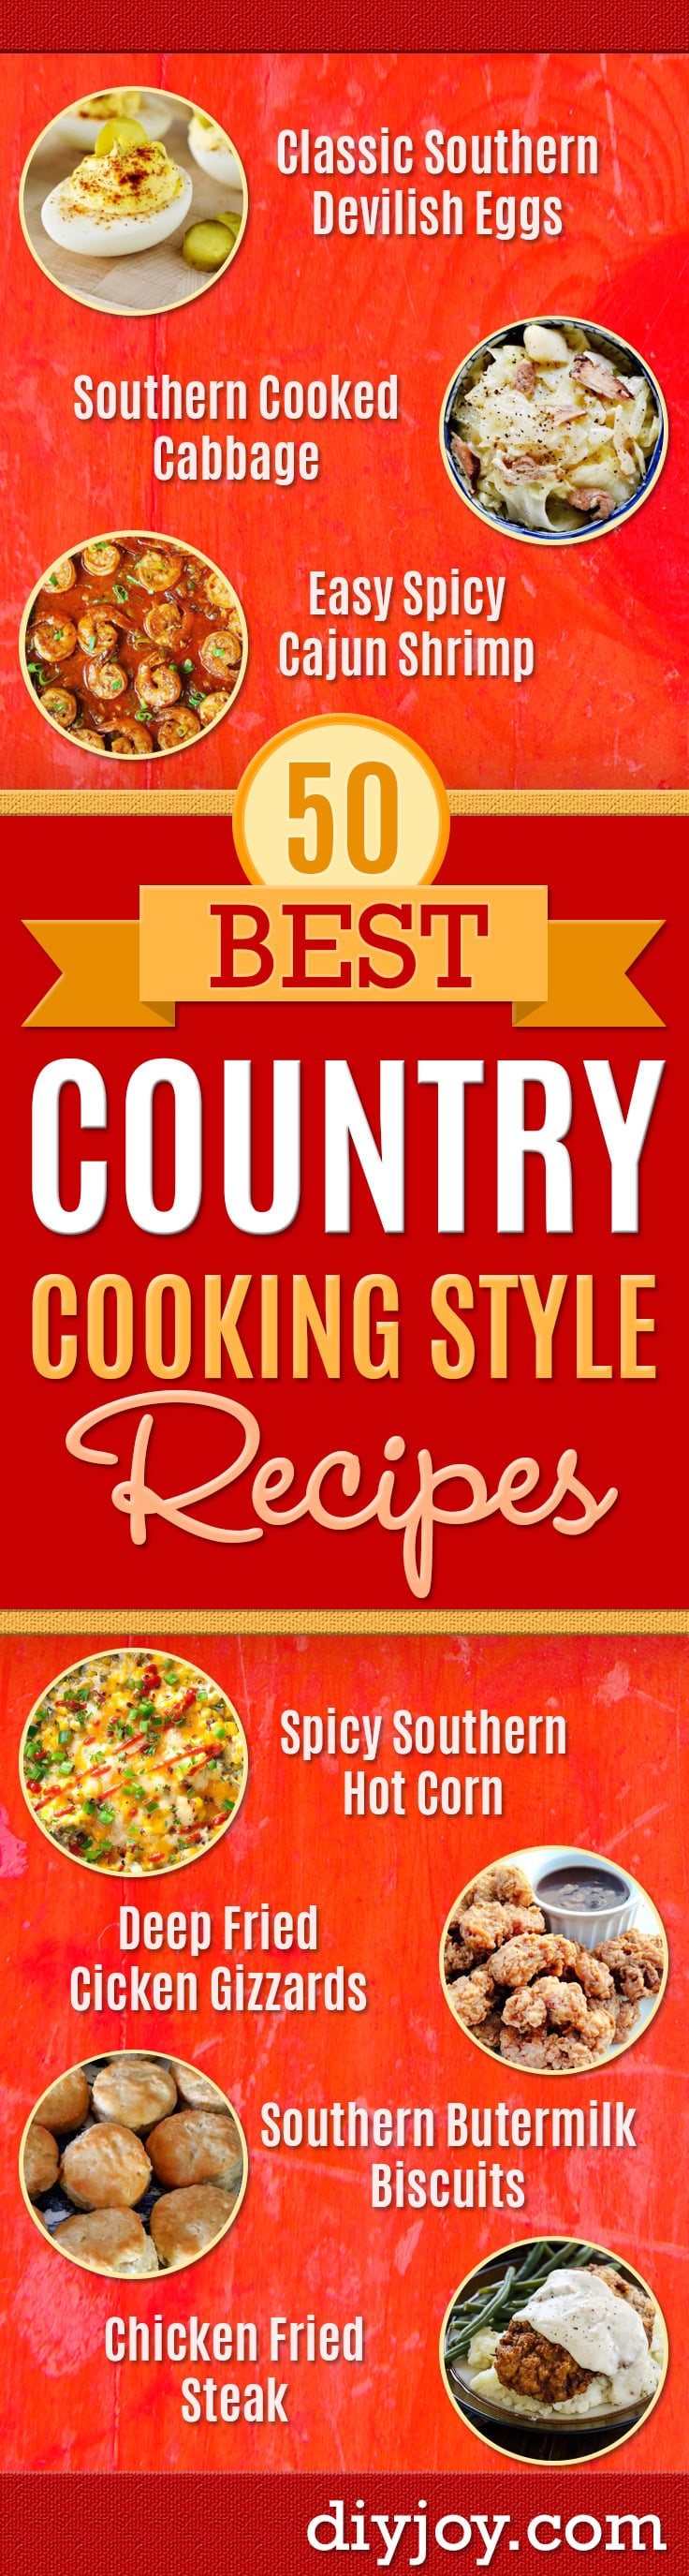 Best Country Cooking Recipes - Easy Recipes for Country Food Like Chicken Fried Steak, Fried Green Tomatoes, Southern Gravy, Breads and Biscuits, Casseroles and More - Breakfast, Lunch and Dinner Recipe Ideas for Families and Feeding A Crowd - Step by Step Instructions for Making Homestyle Dips, Snacks, Desserts